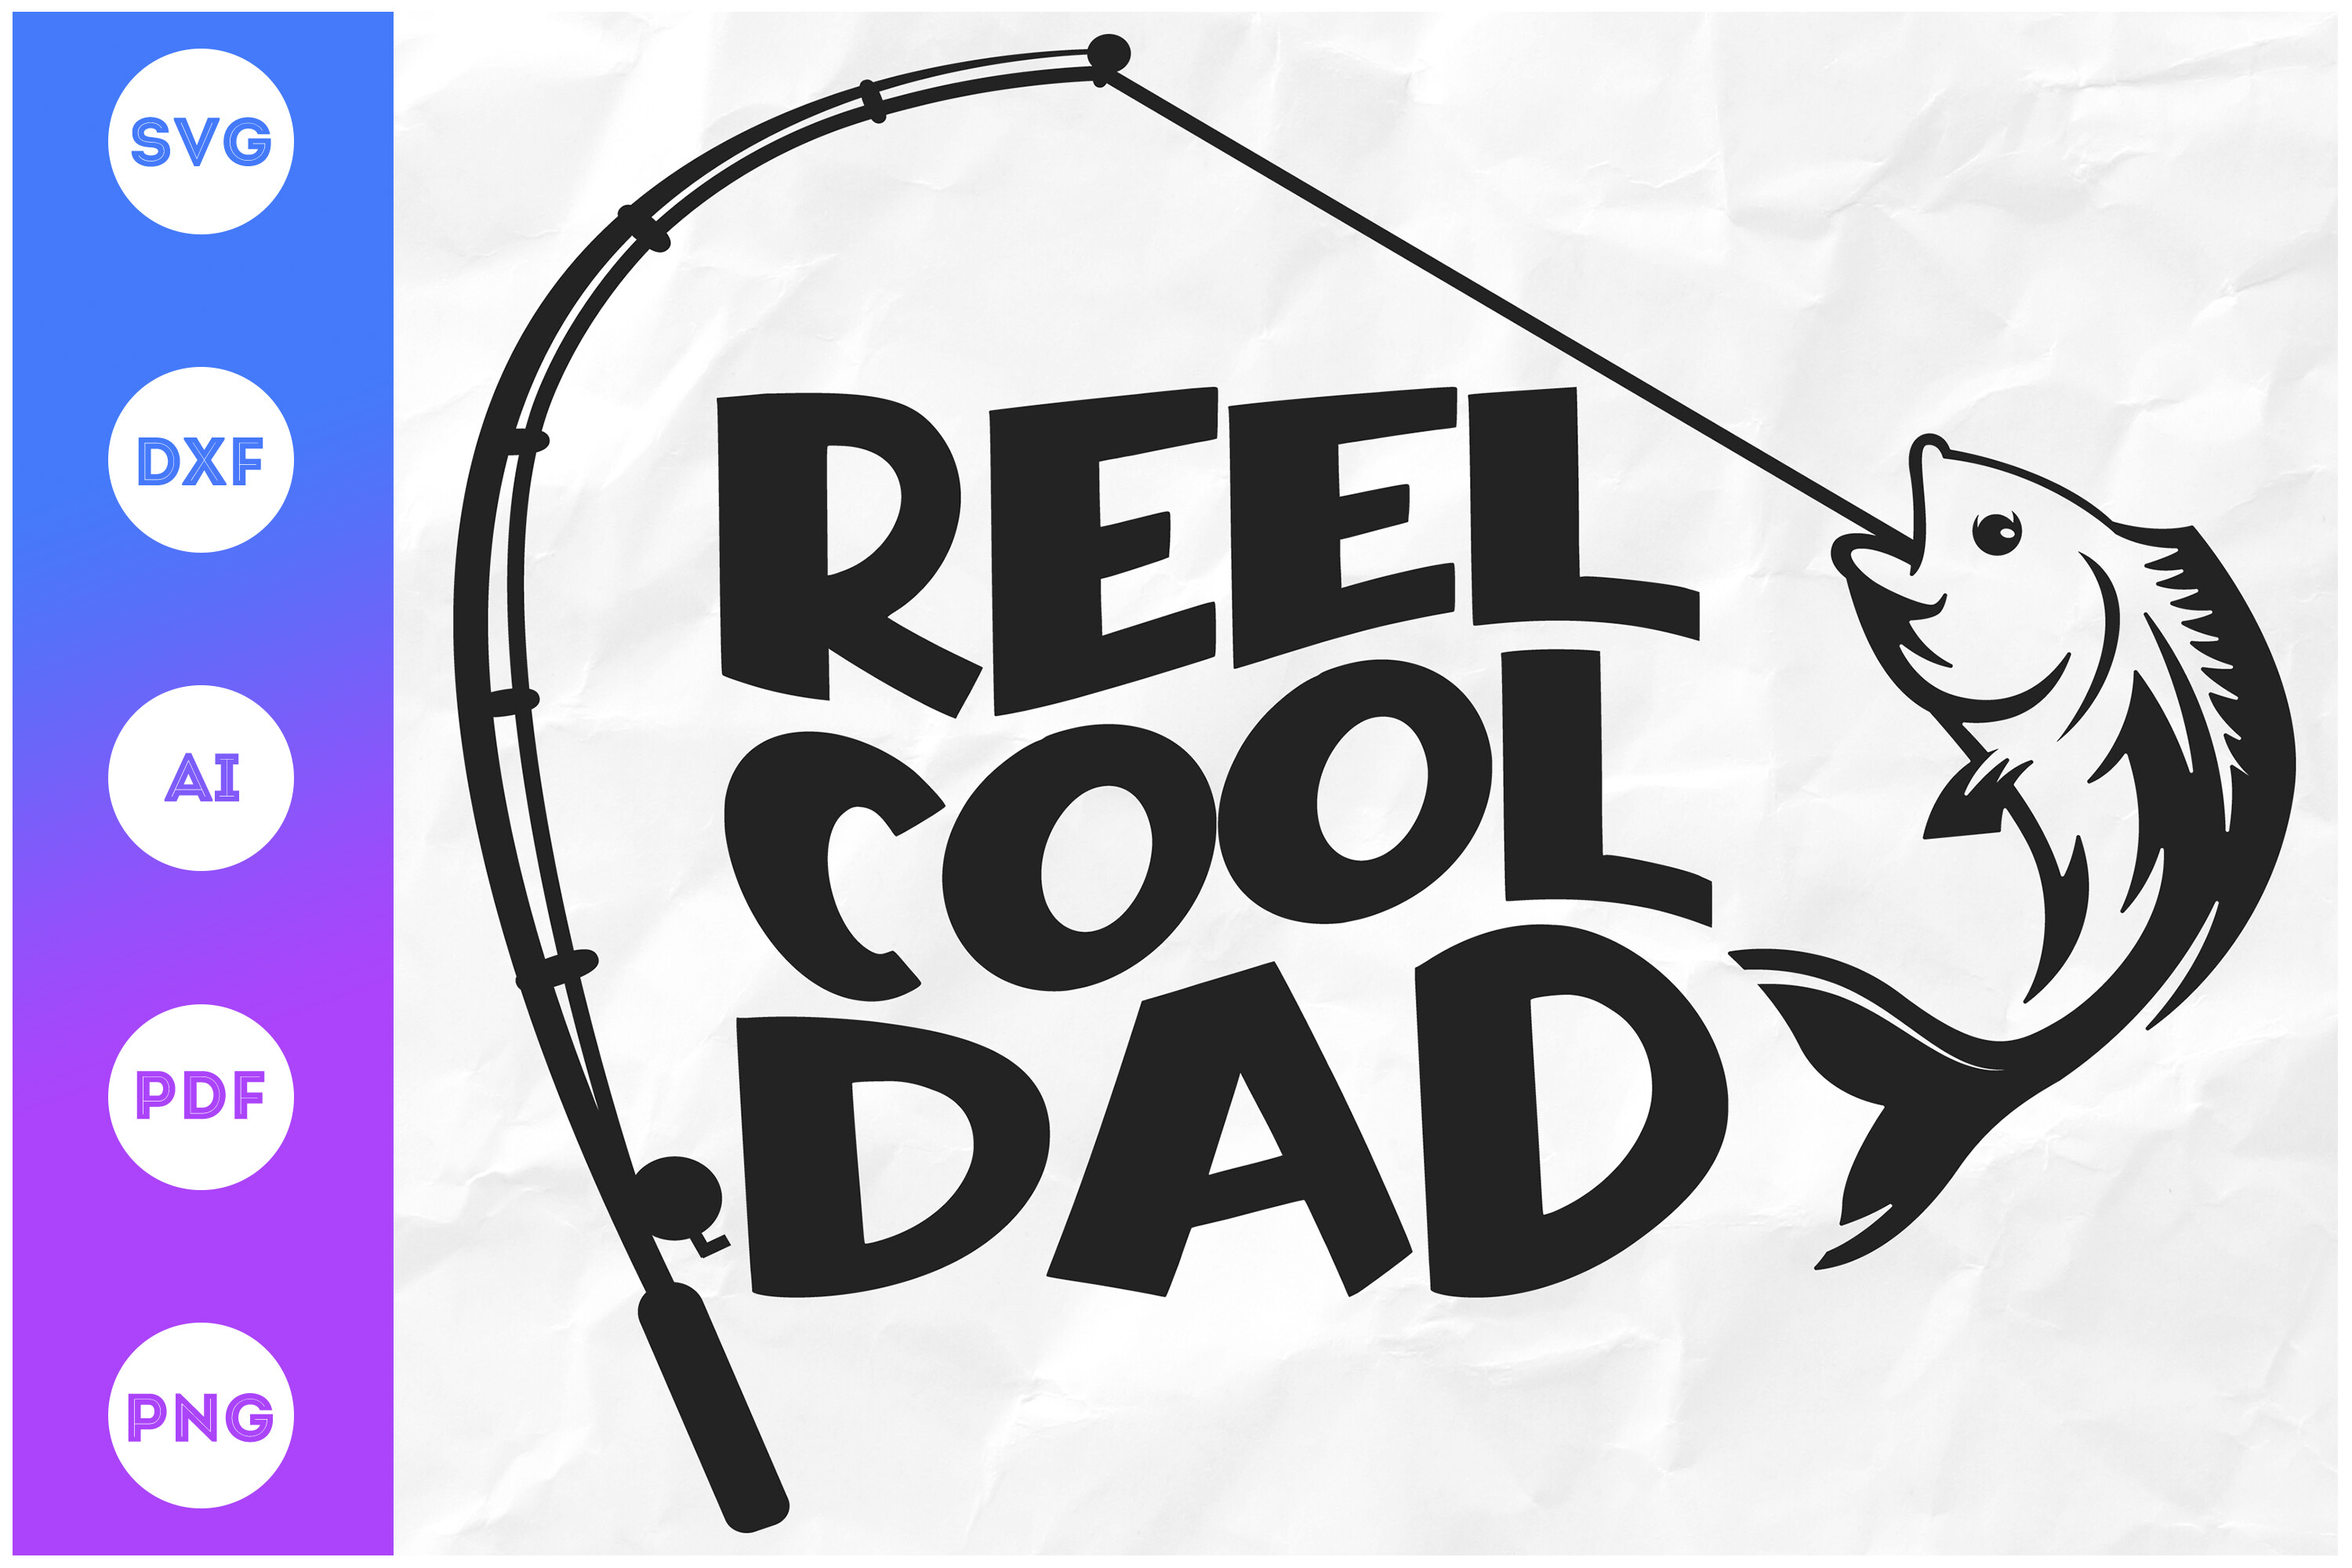 Reel Cool Dad SVG  Fishing SVG Graphic by craftiversally